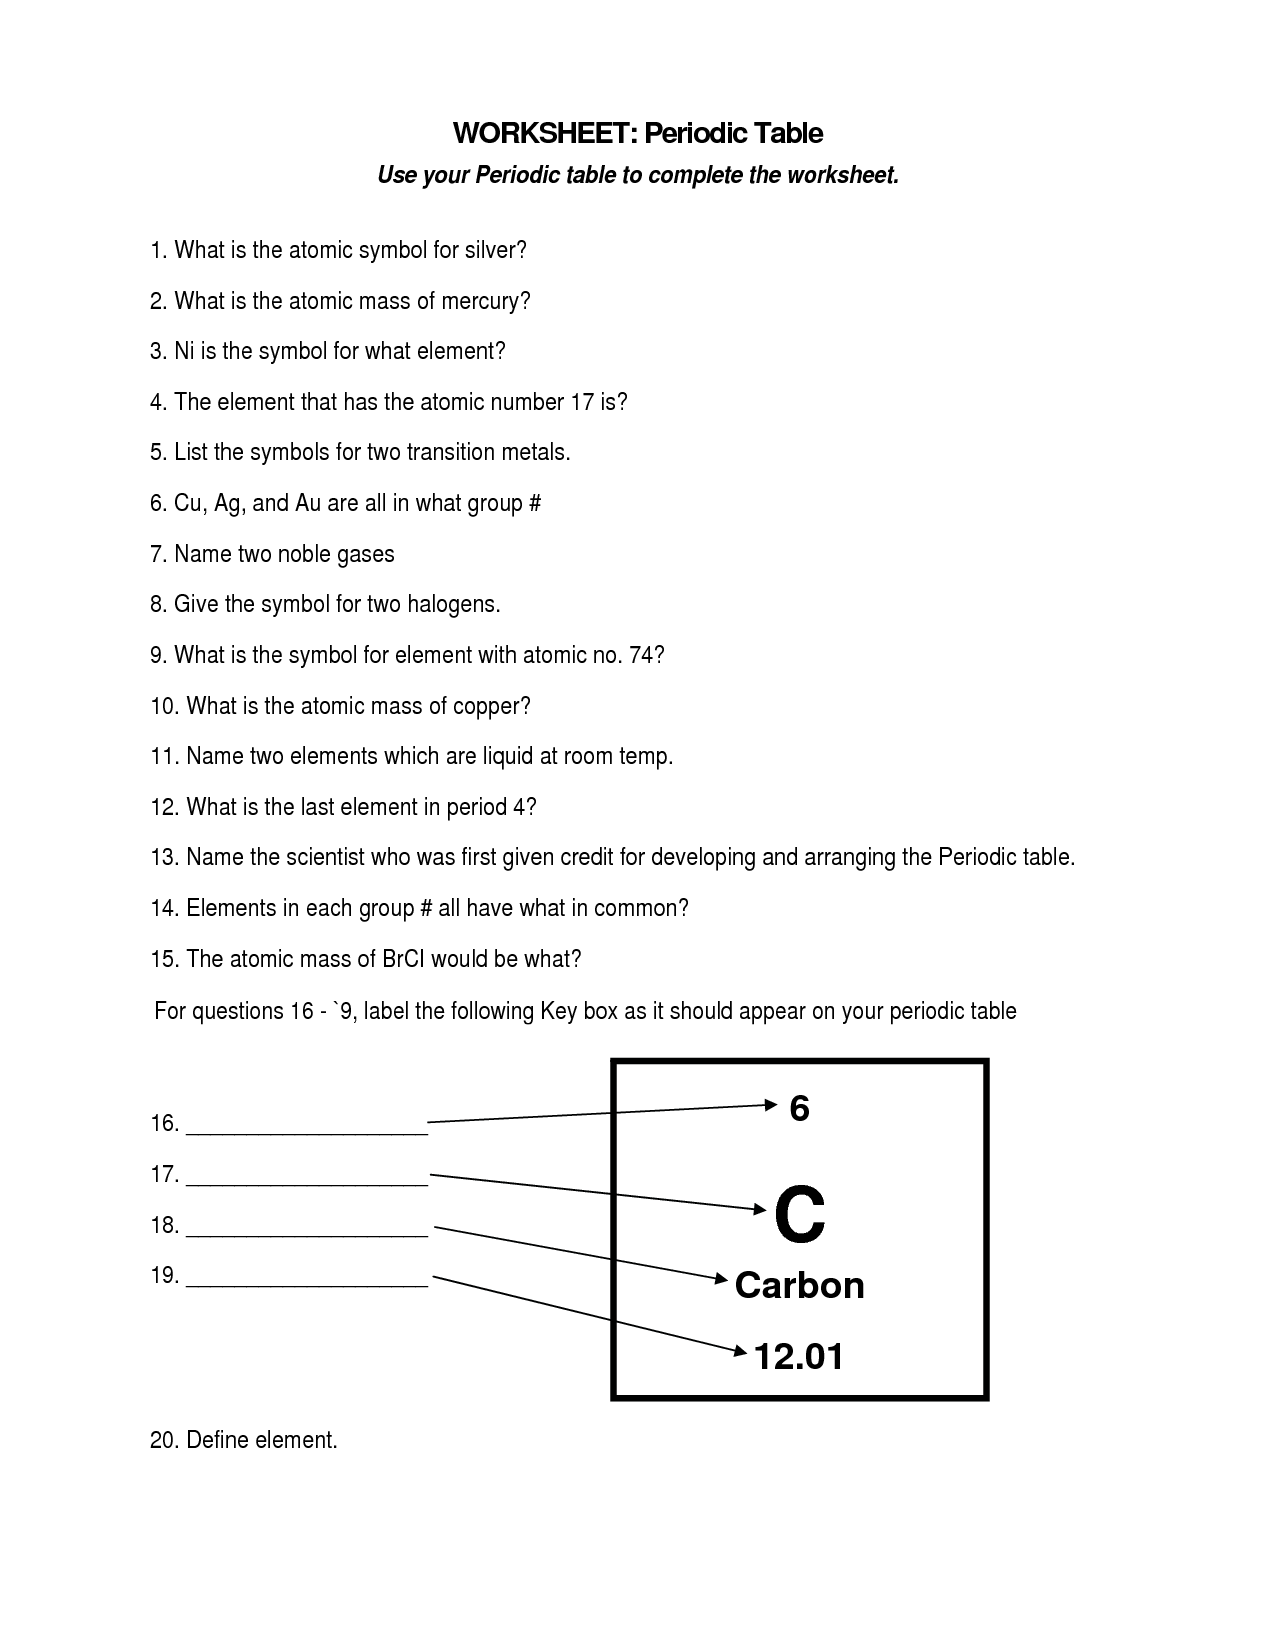 Elements and Periodic Table Worksheet Image